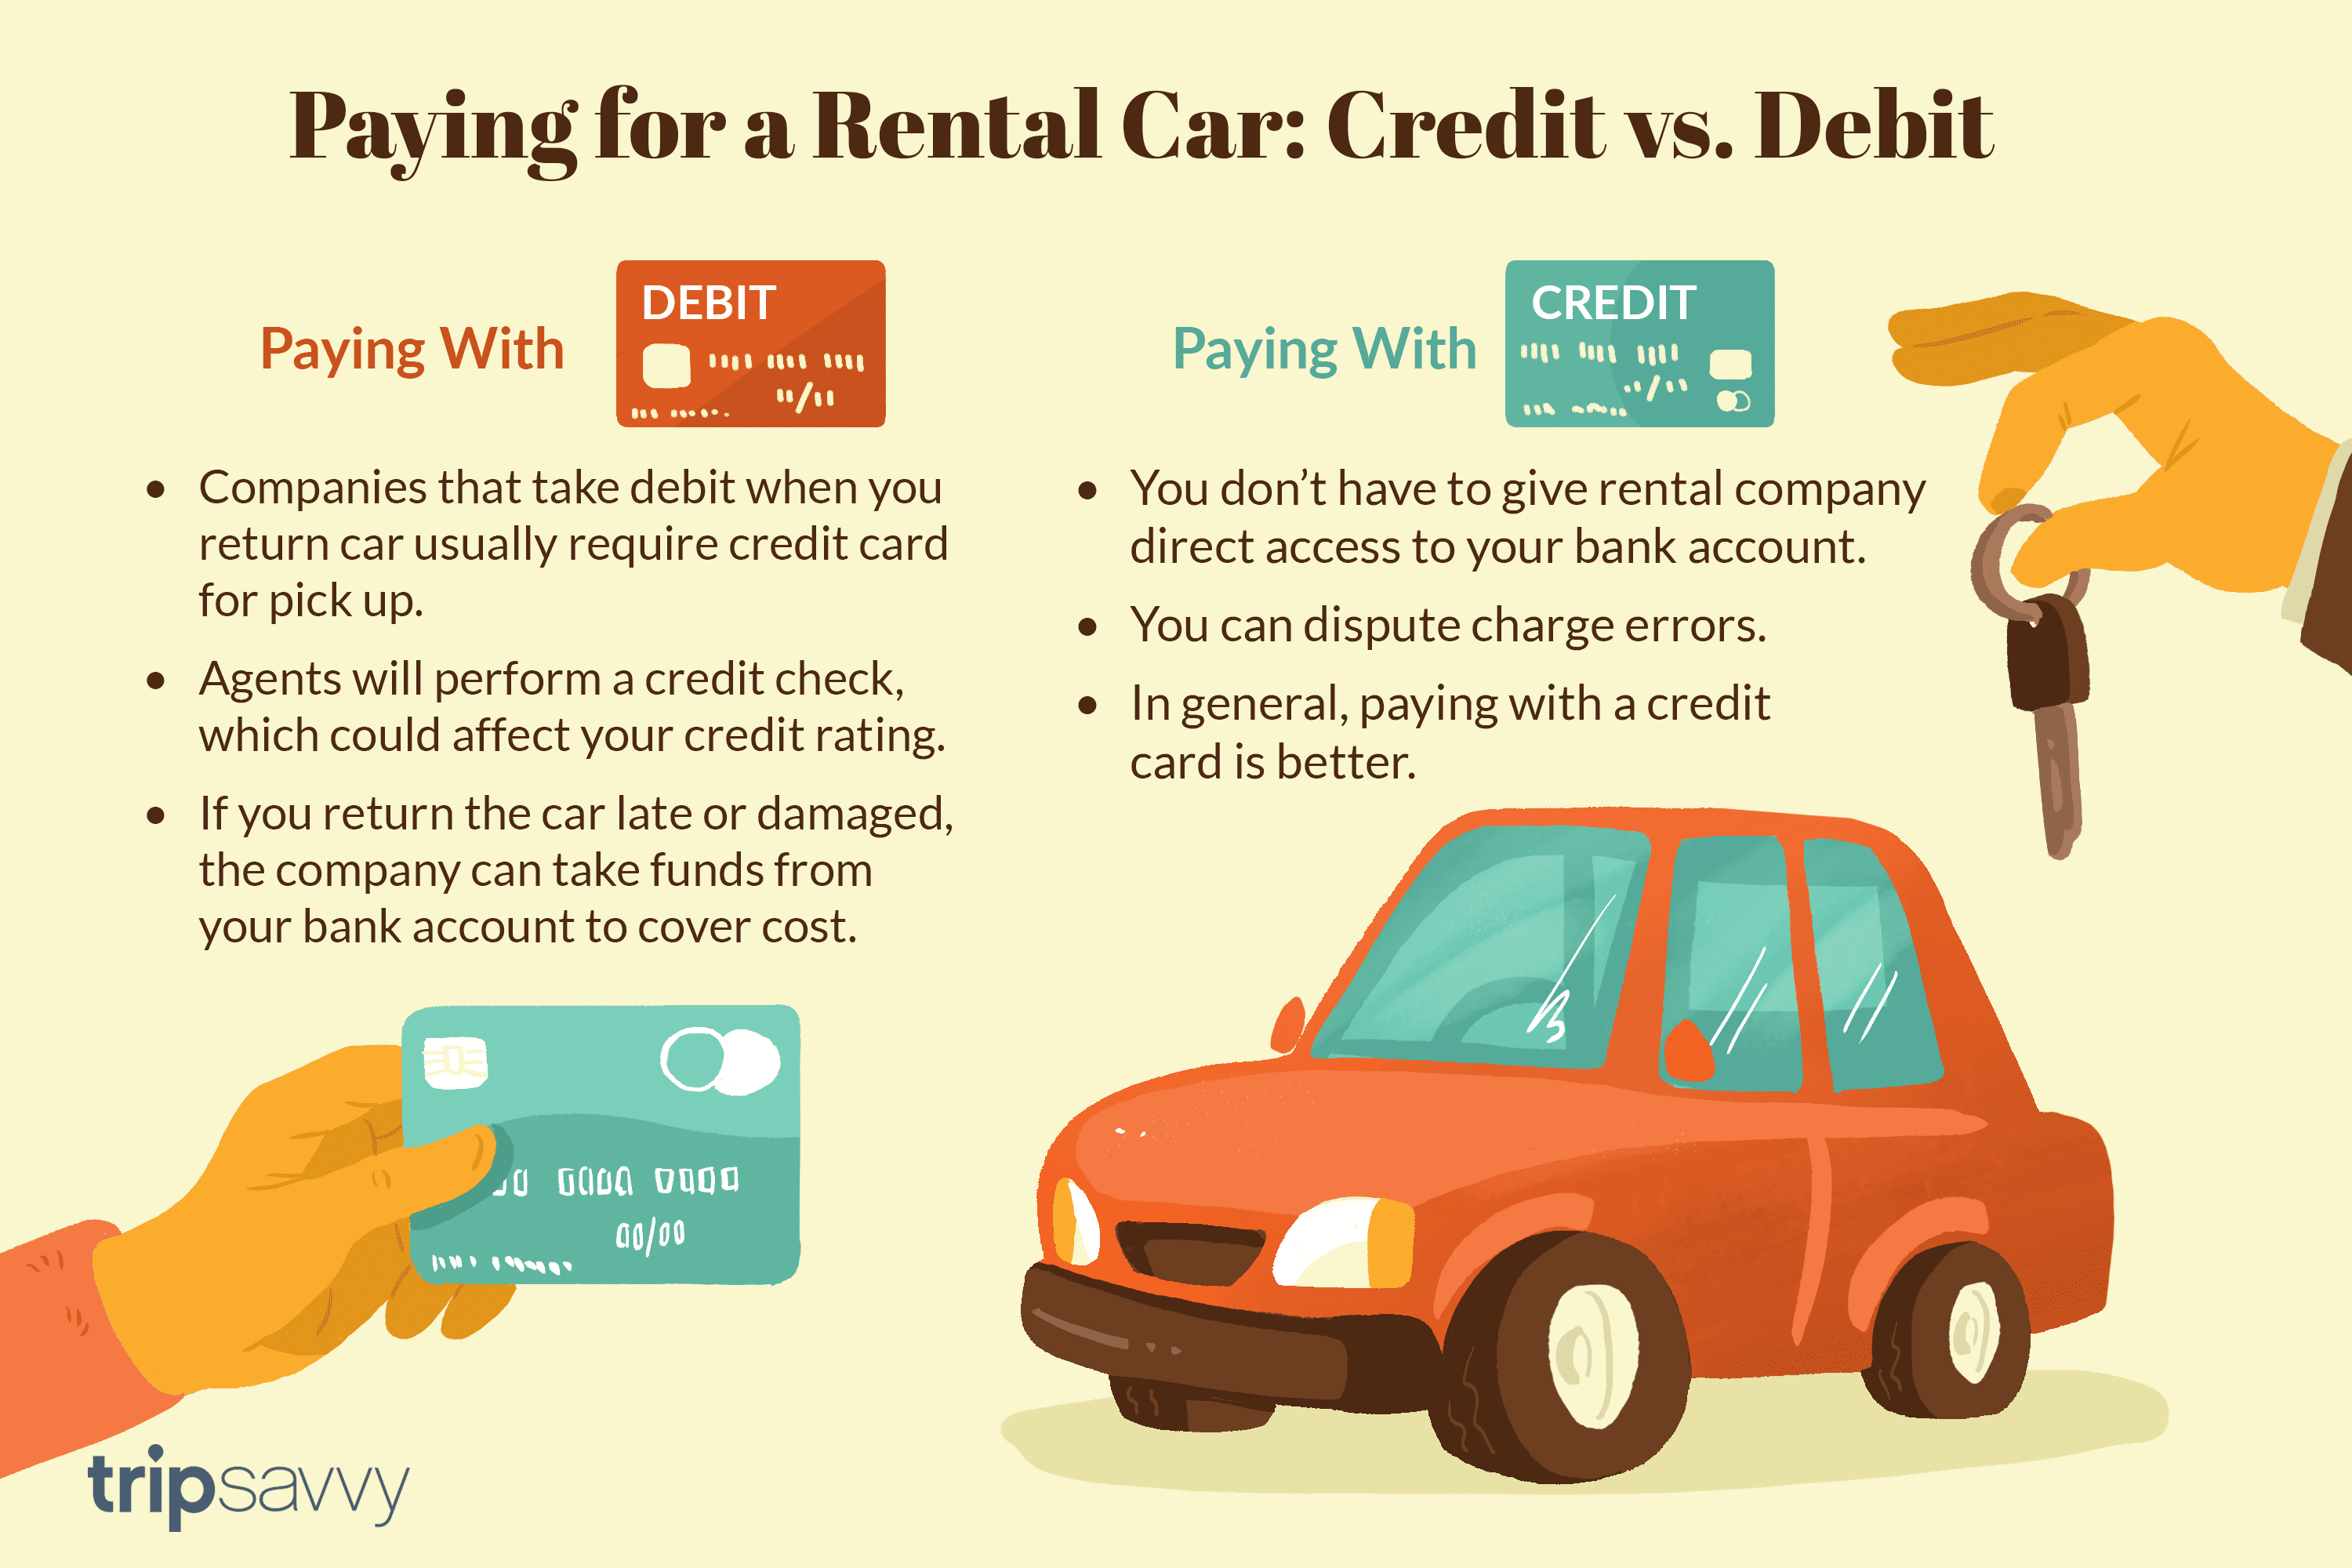 Rental Cars: Paying With Credit or Debit Cards